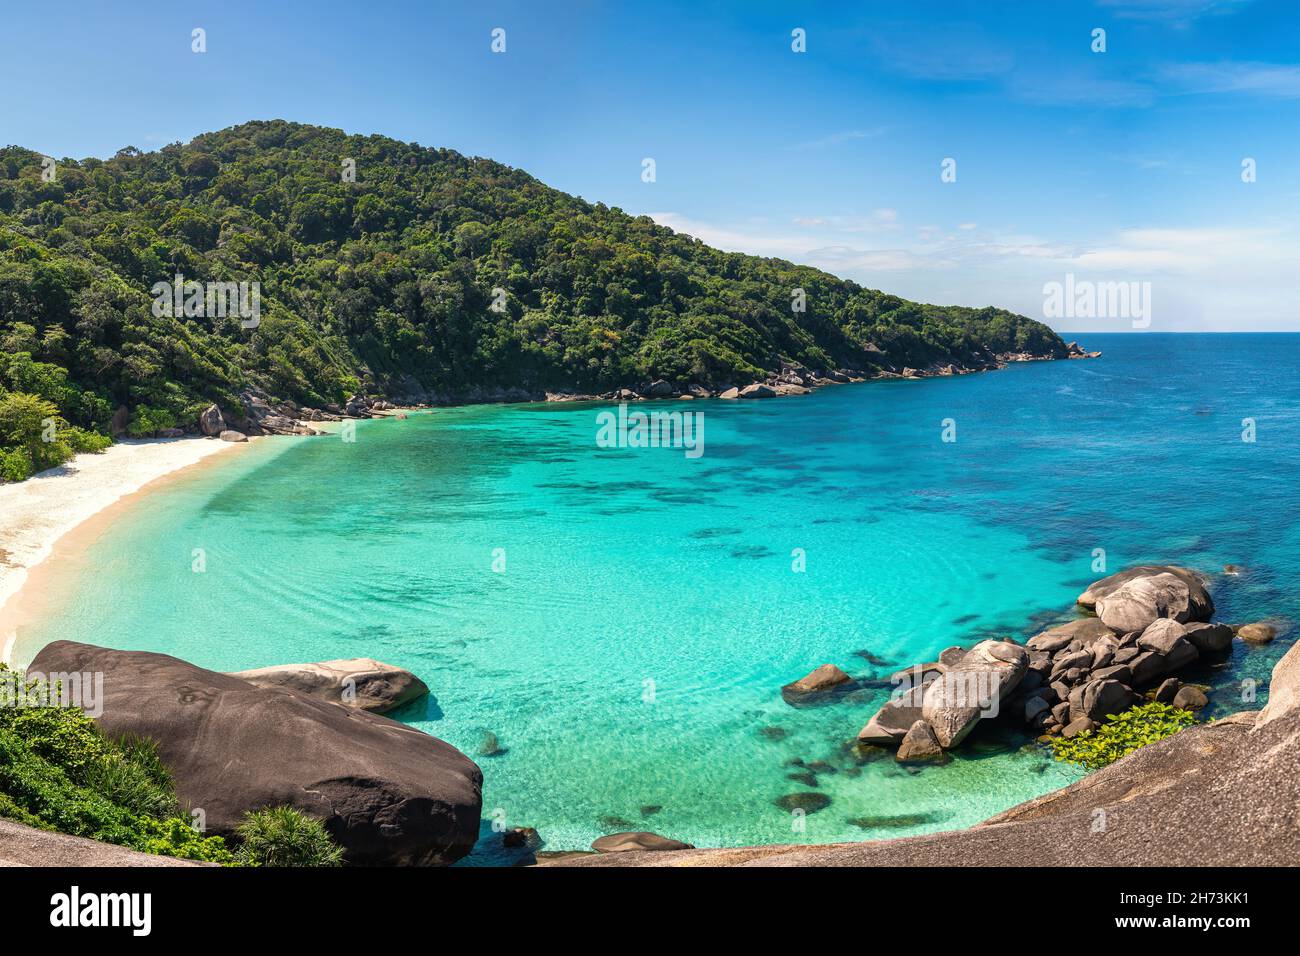 Tropical islands of ocean blue sea water and white sand beach at Similan Islands from famous viewpoint, Phang Nga Thailand nature landscape Stock Photo